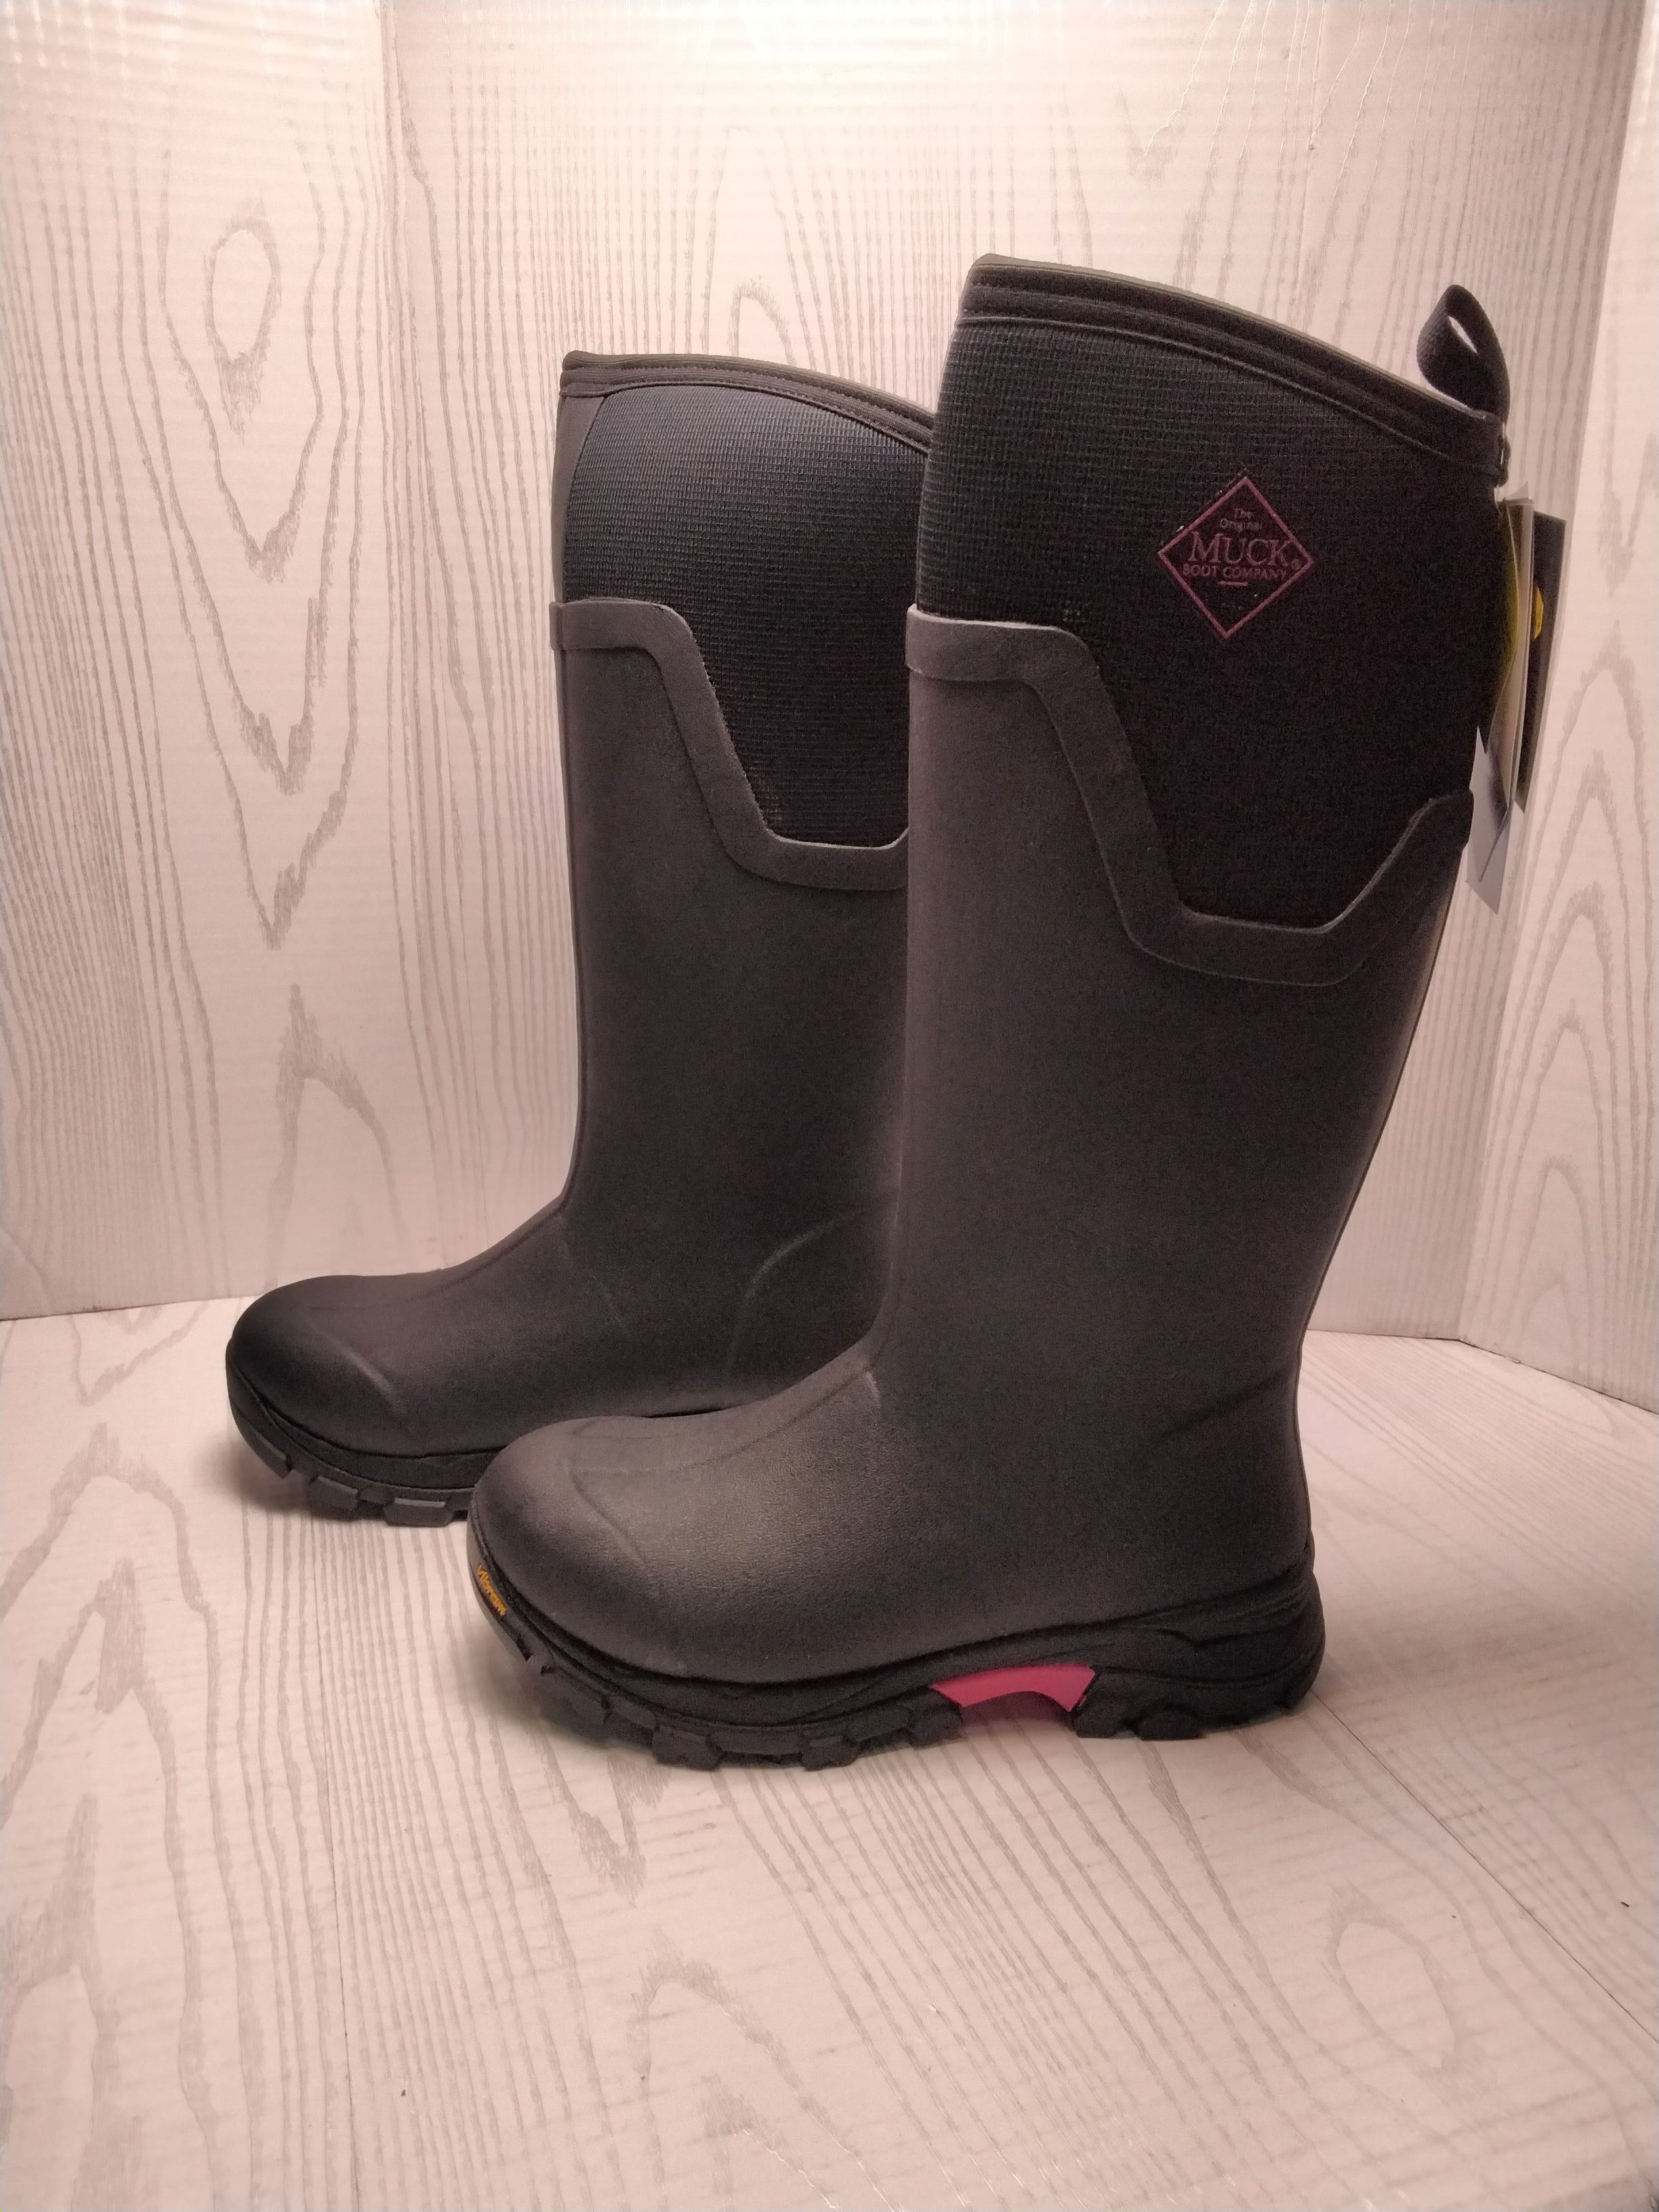 Muck Women's Artic Ice Tall Boots - AS2TV-404, Pink, Size 8 (7928584929518)